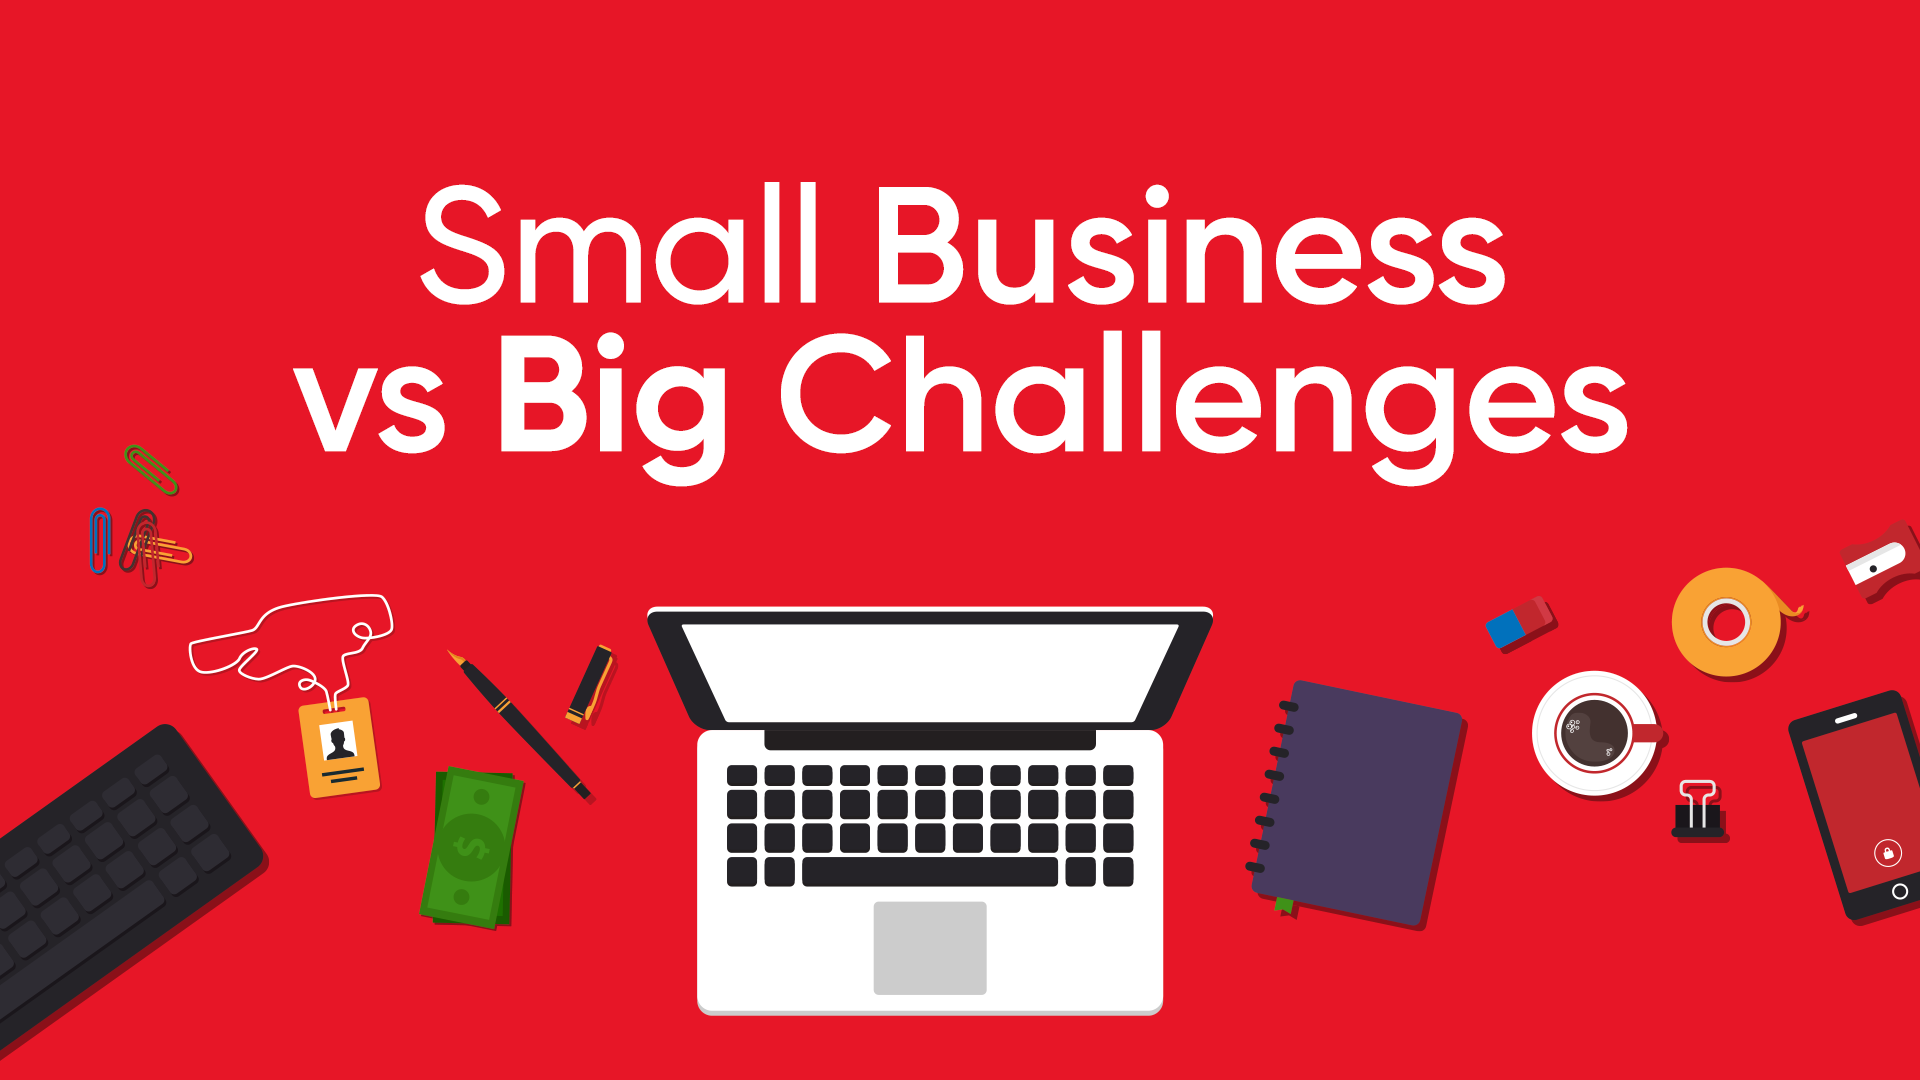 Small Business vs. Big Challenges